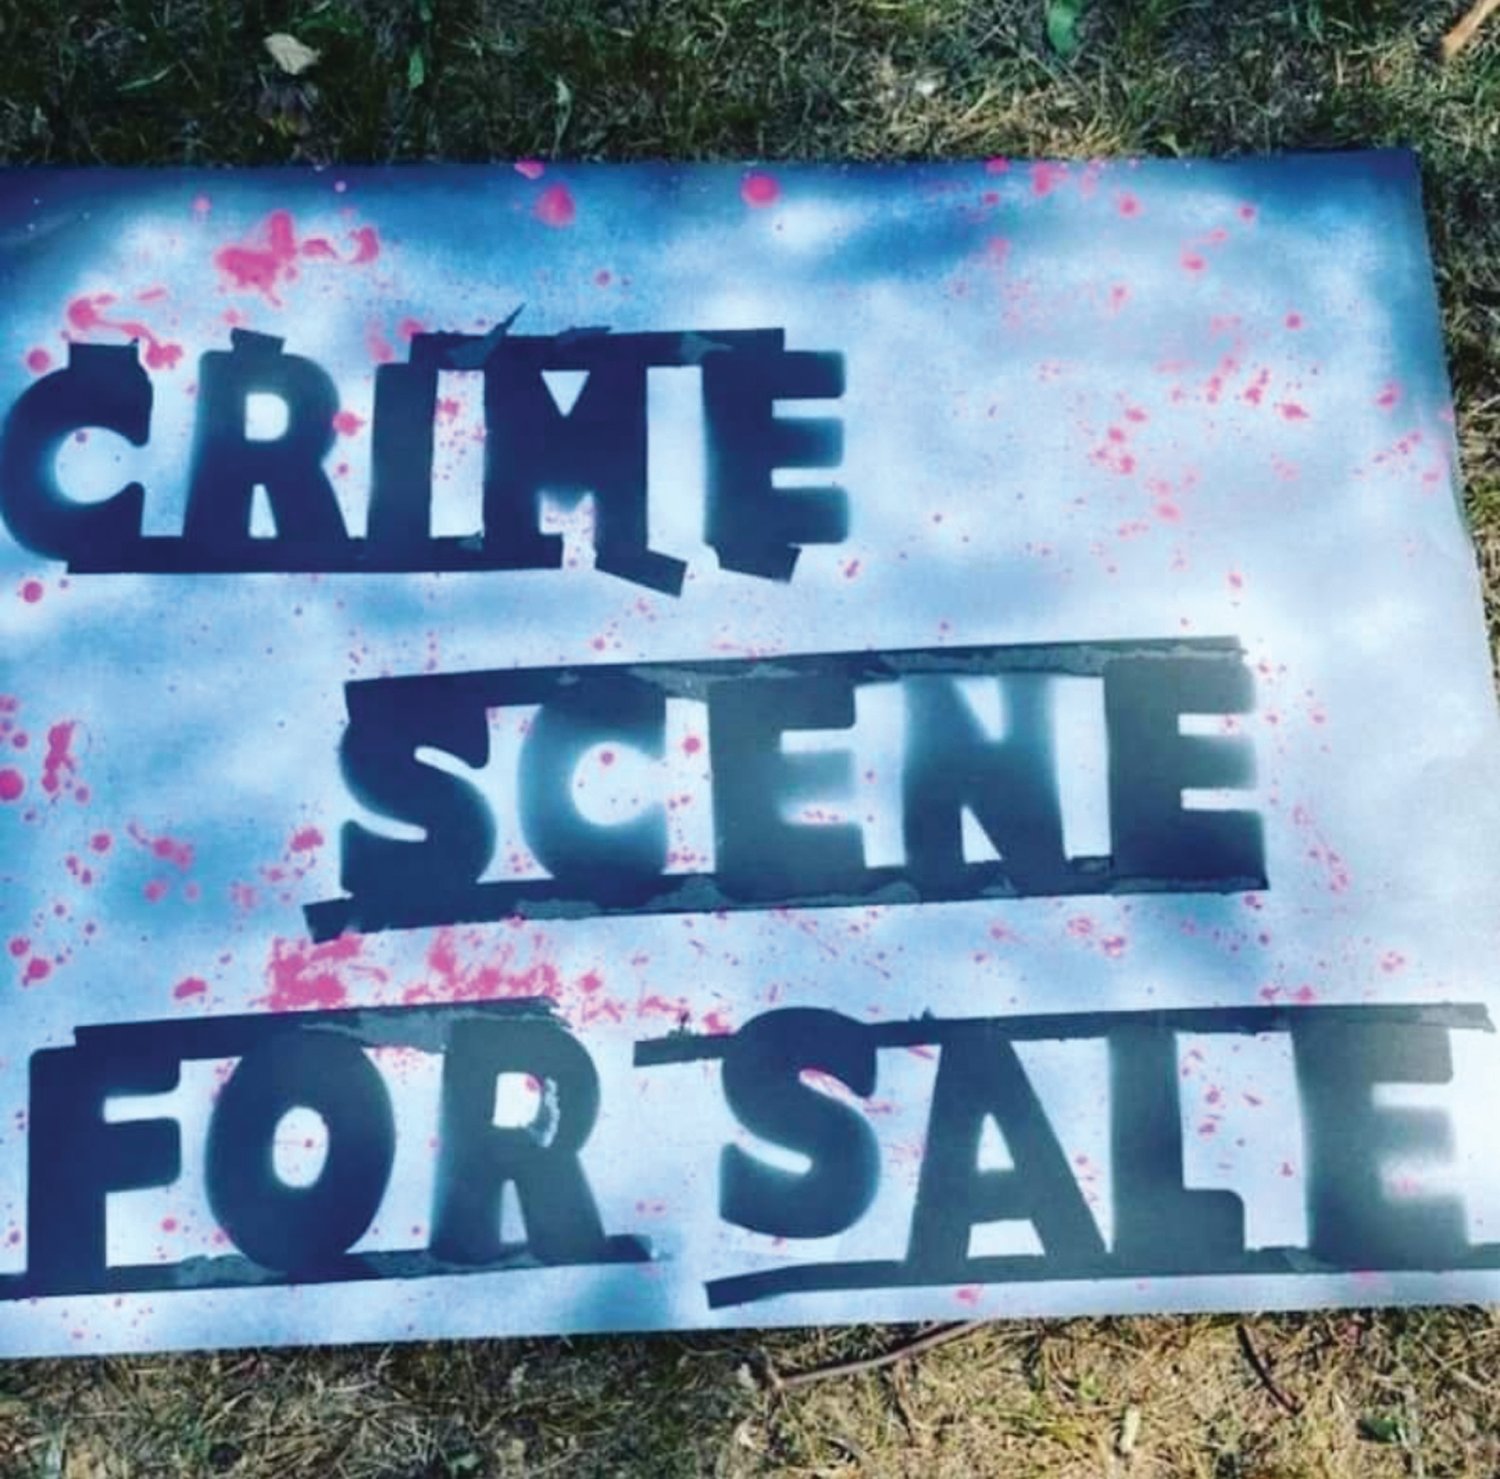 HE HAS A SIGN TOO: David Viens is the father of Dillon Viens, 16, a Johnston resident and student at who died following a “shooting” at 78 Cedar St. The home is now for sale, and David picketed a recent Open House. He carried signs reading: “CRIME SCENE FOR SALE” and “Open Investigation for SALE,” and wanted to ensure potential buyers knew what happened in the house.